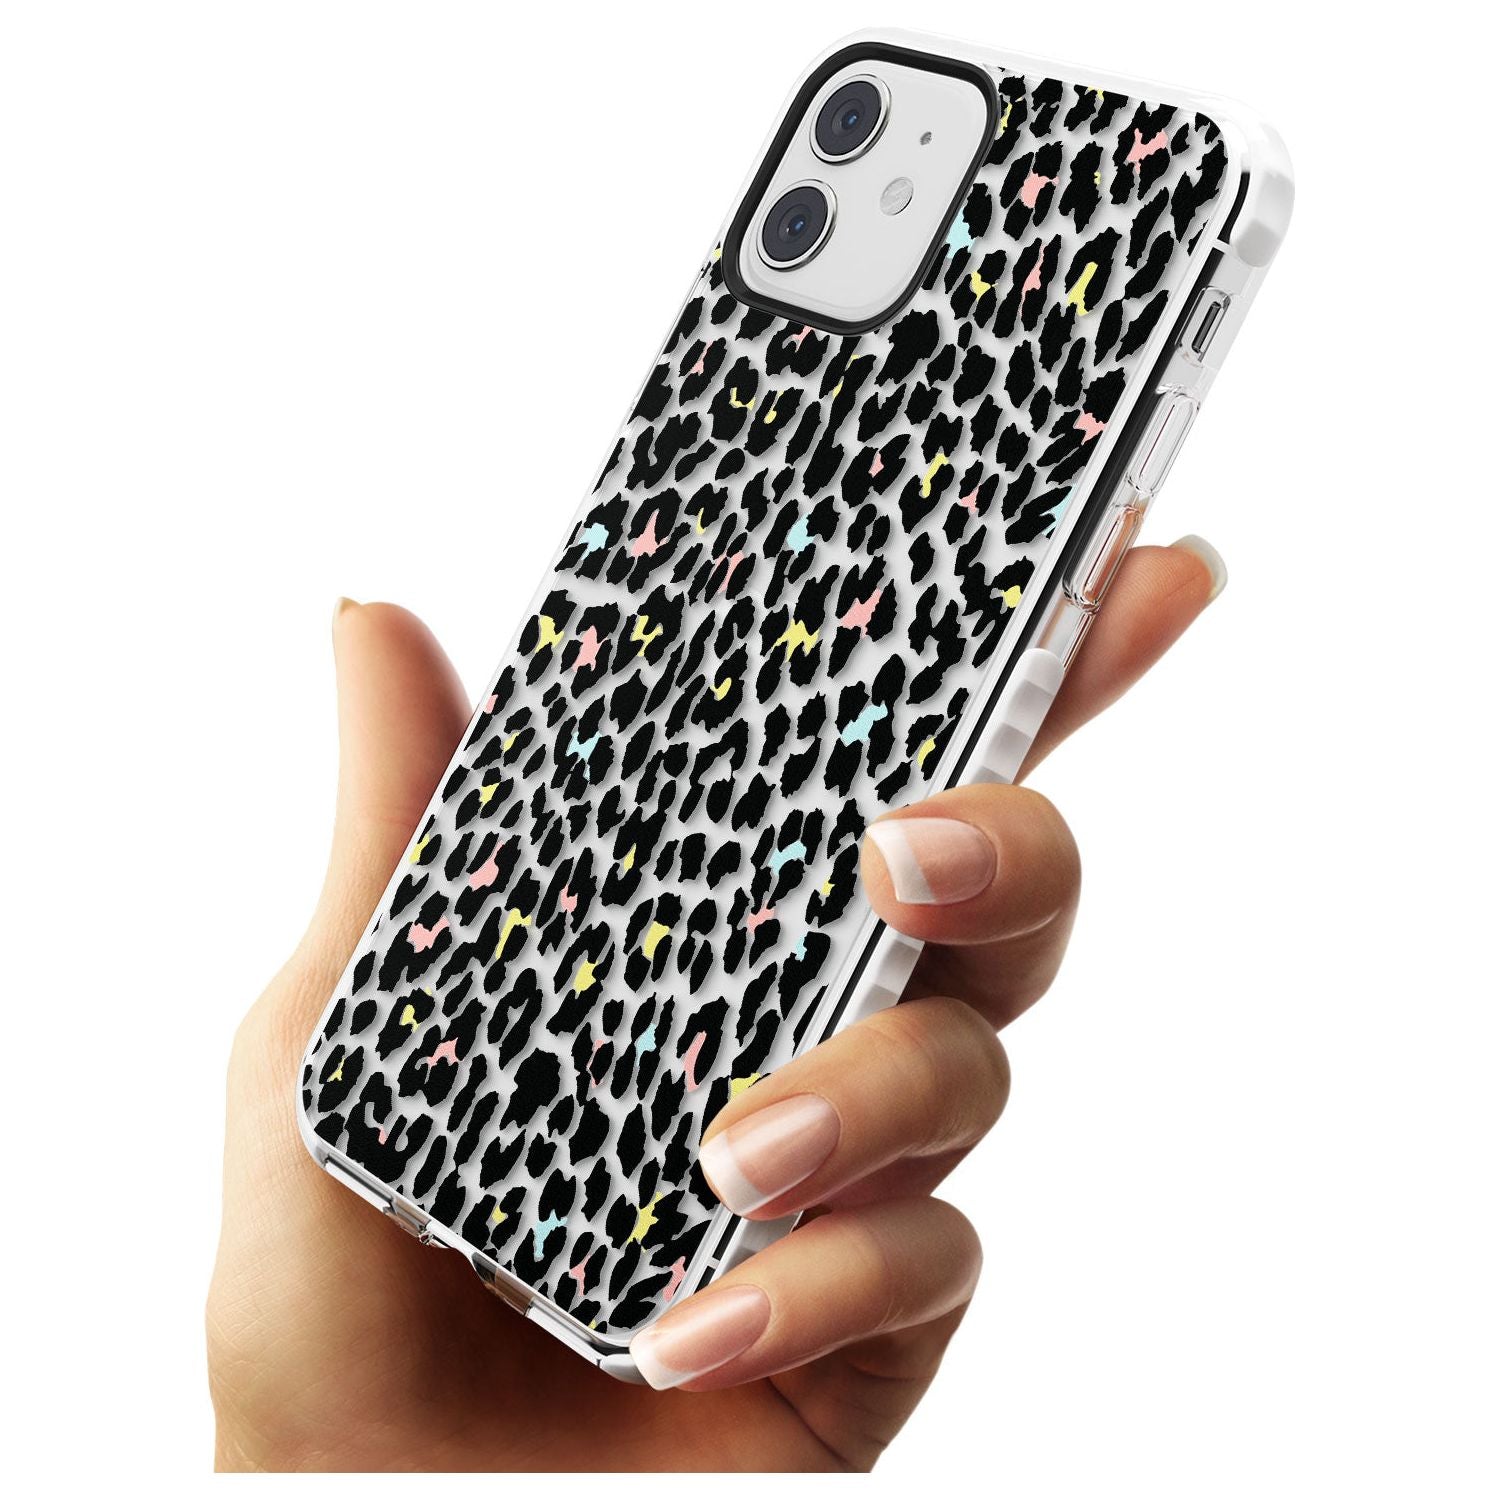 Mixed Pastels Leopard Print - Transparent Impact Phone Case for iPhone 11